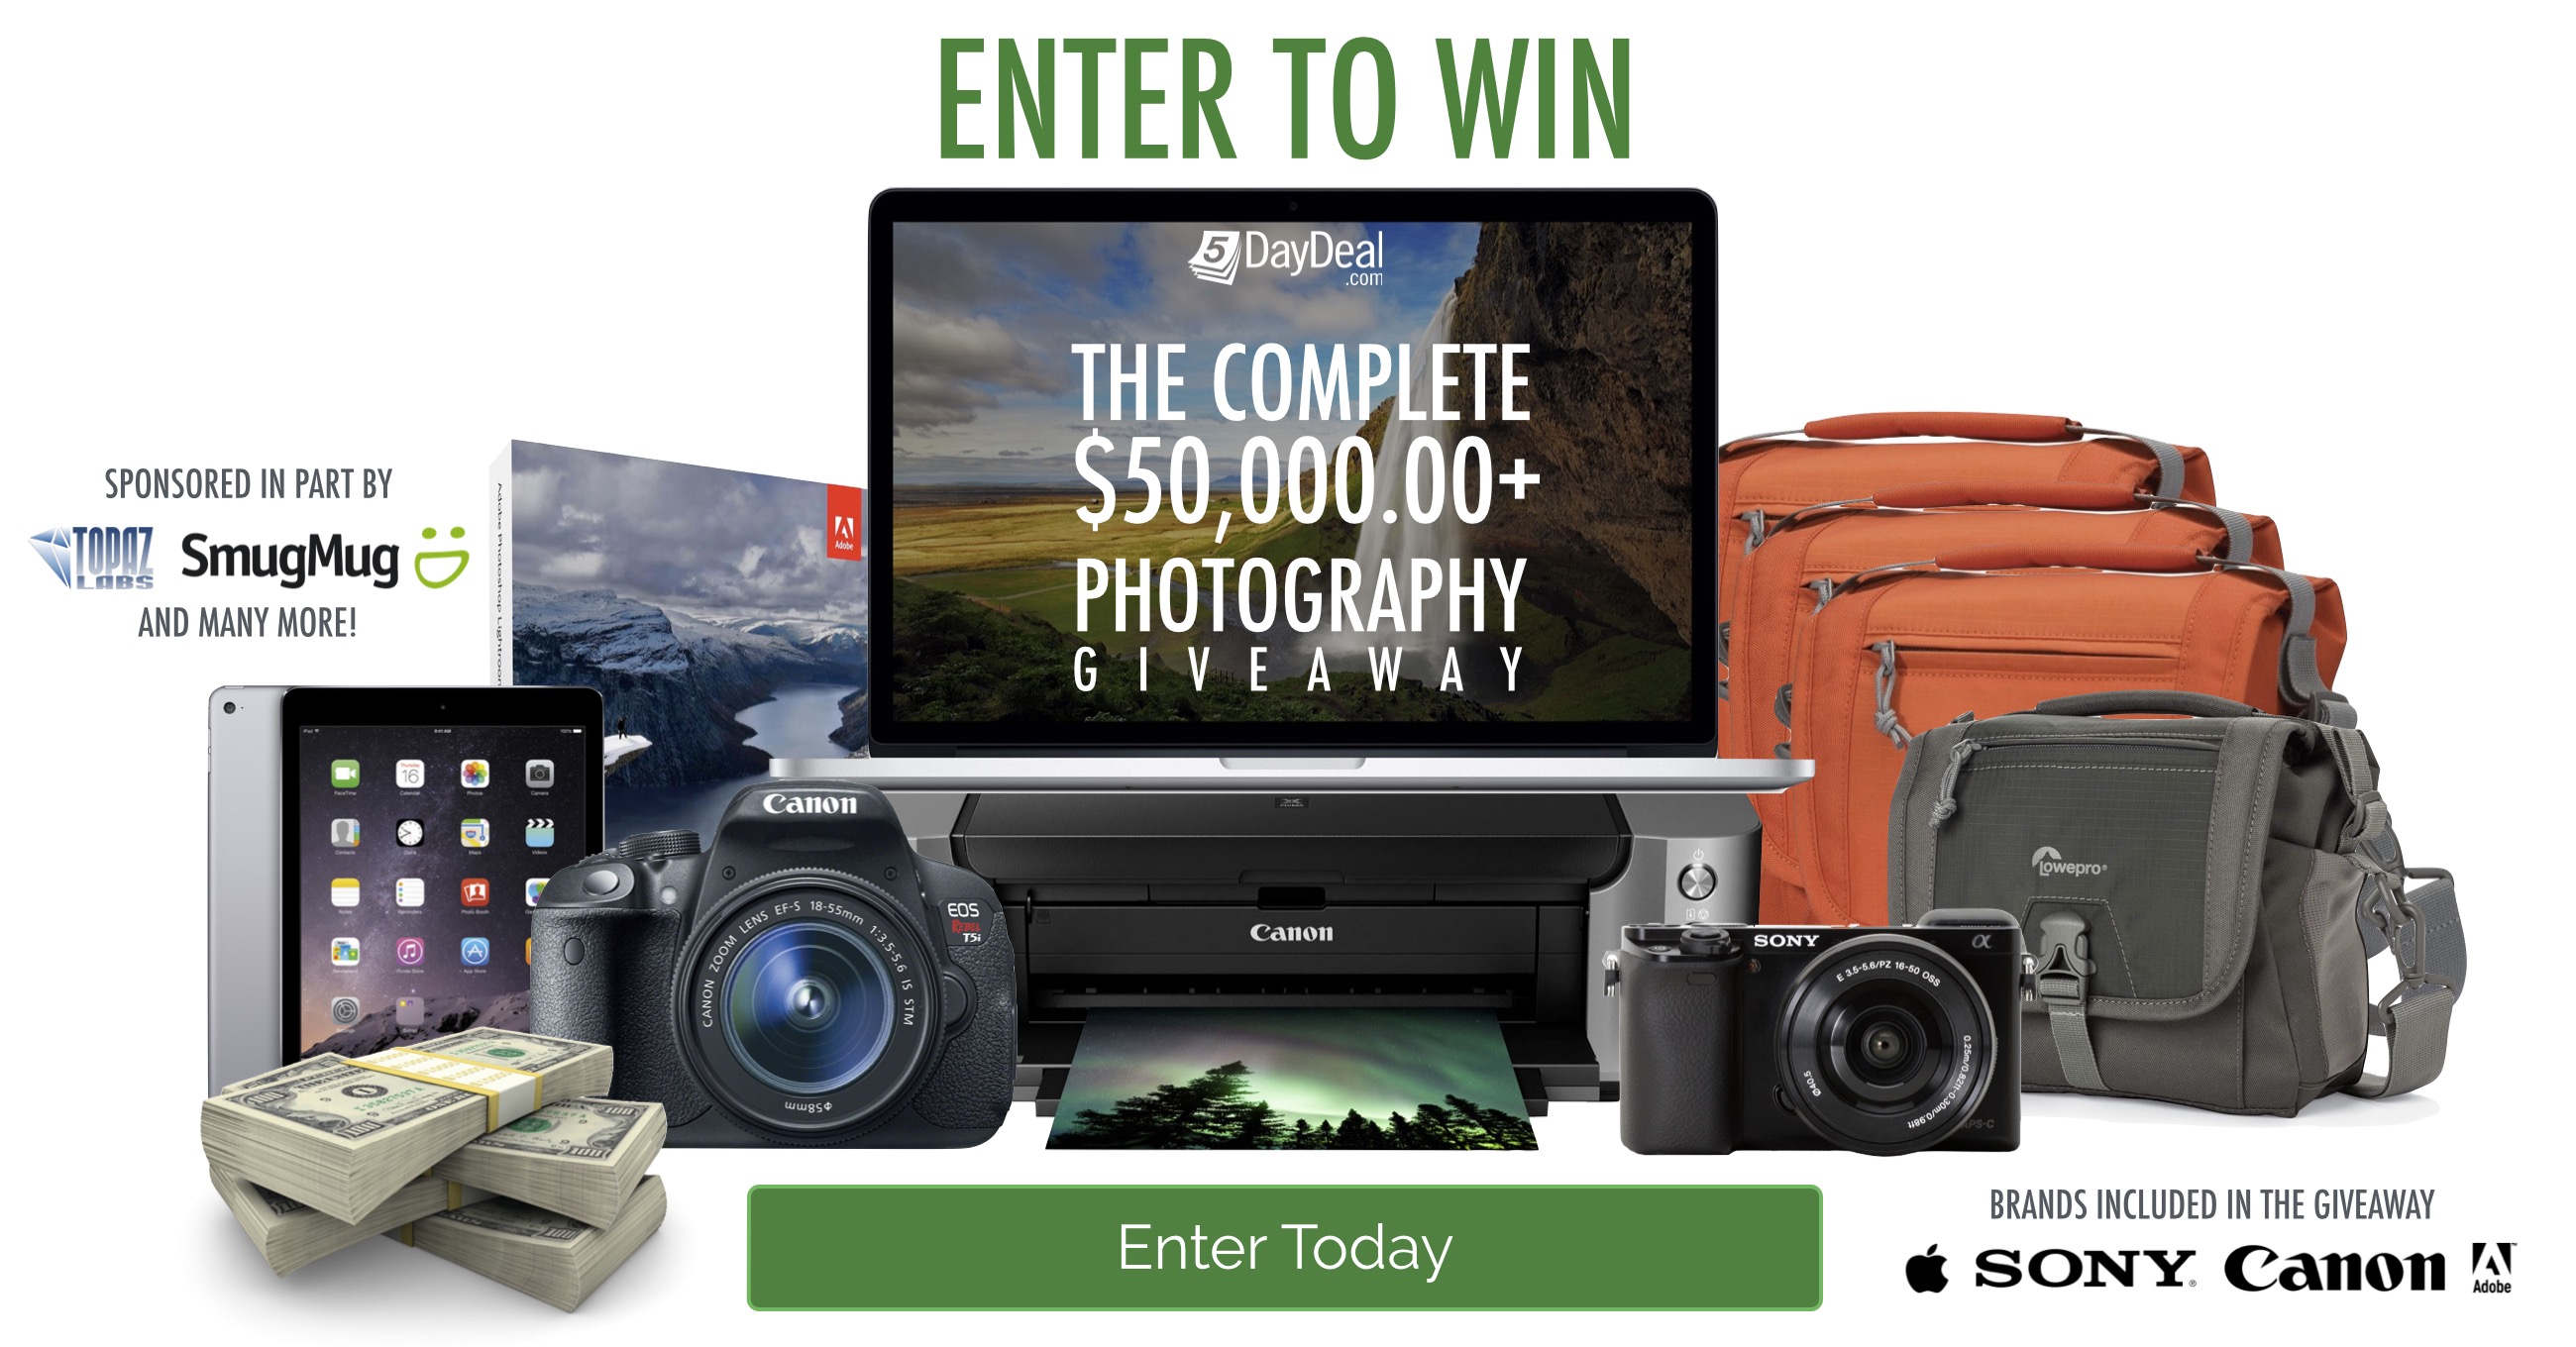 5DayDeal-50000-Photography-Giveaway